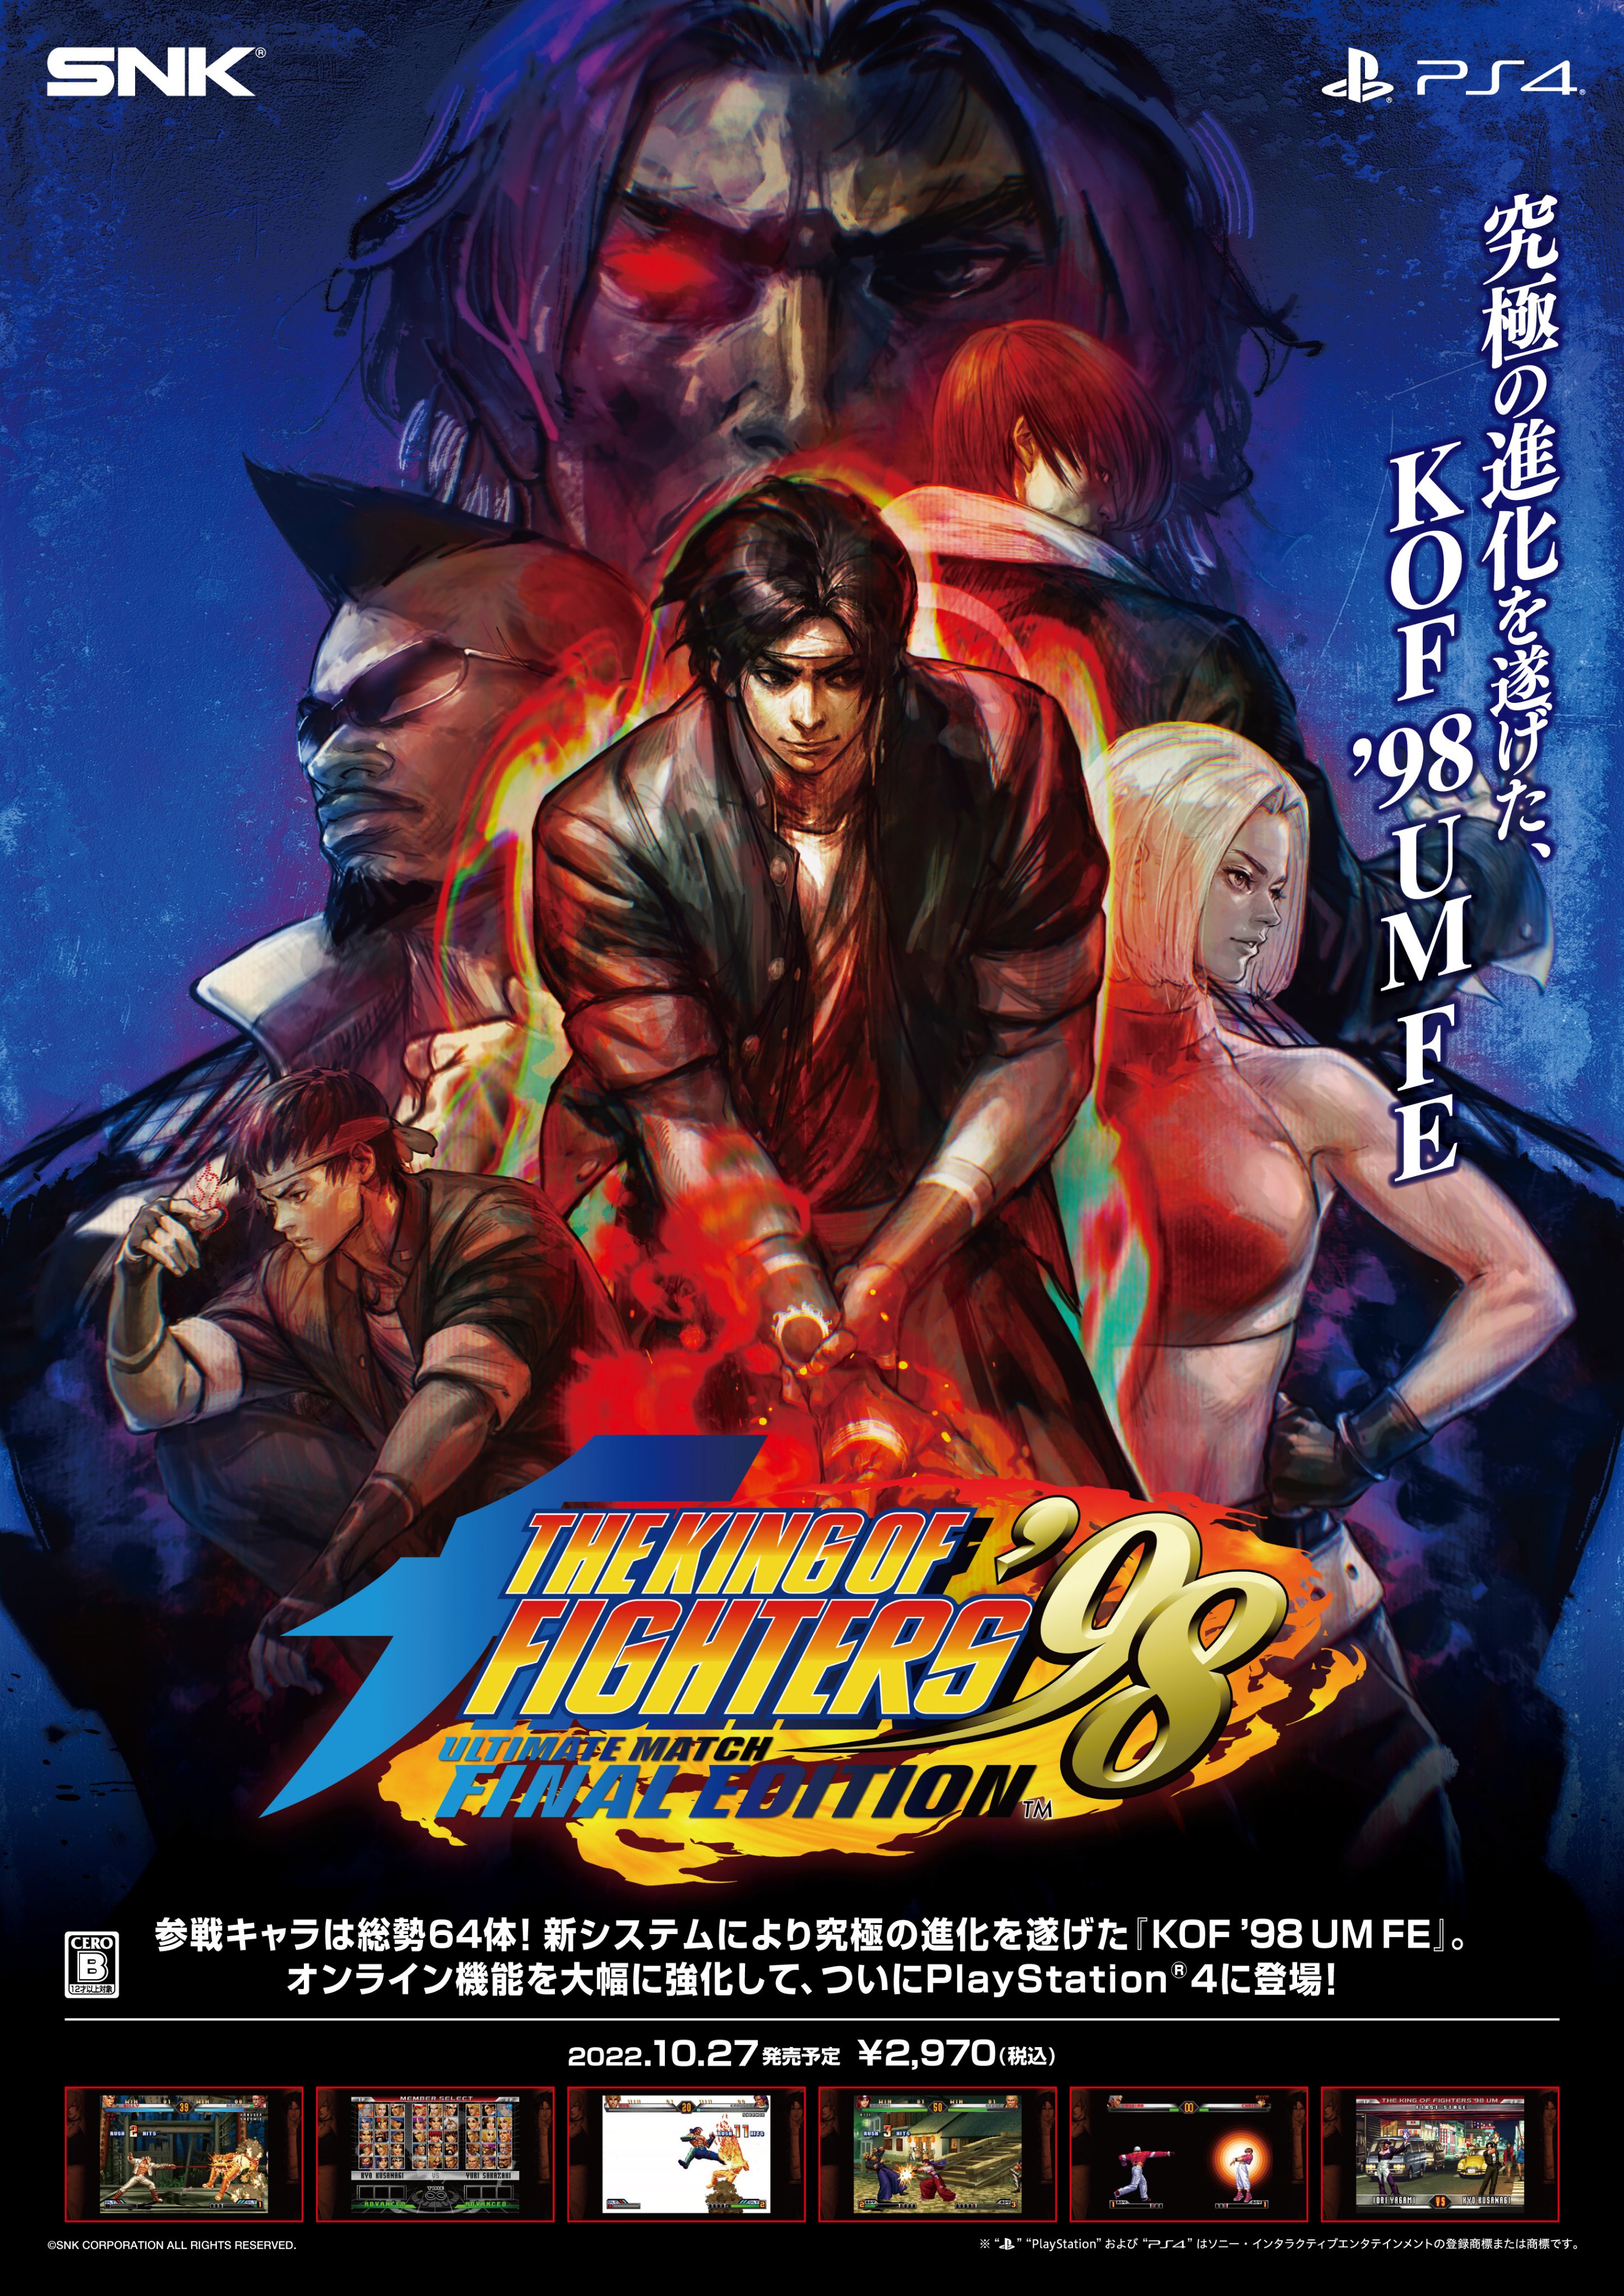  The King of Fighters 2002 (SNK Best Collection) [Japan